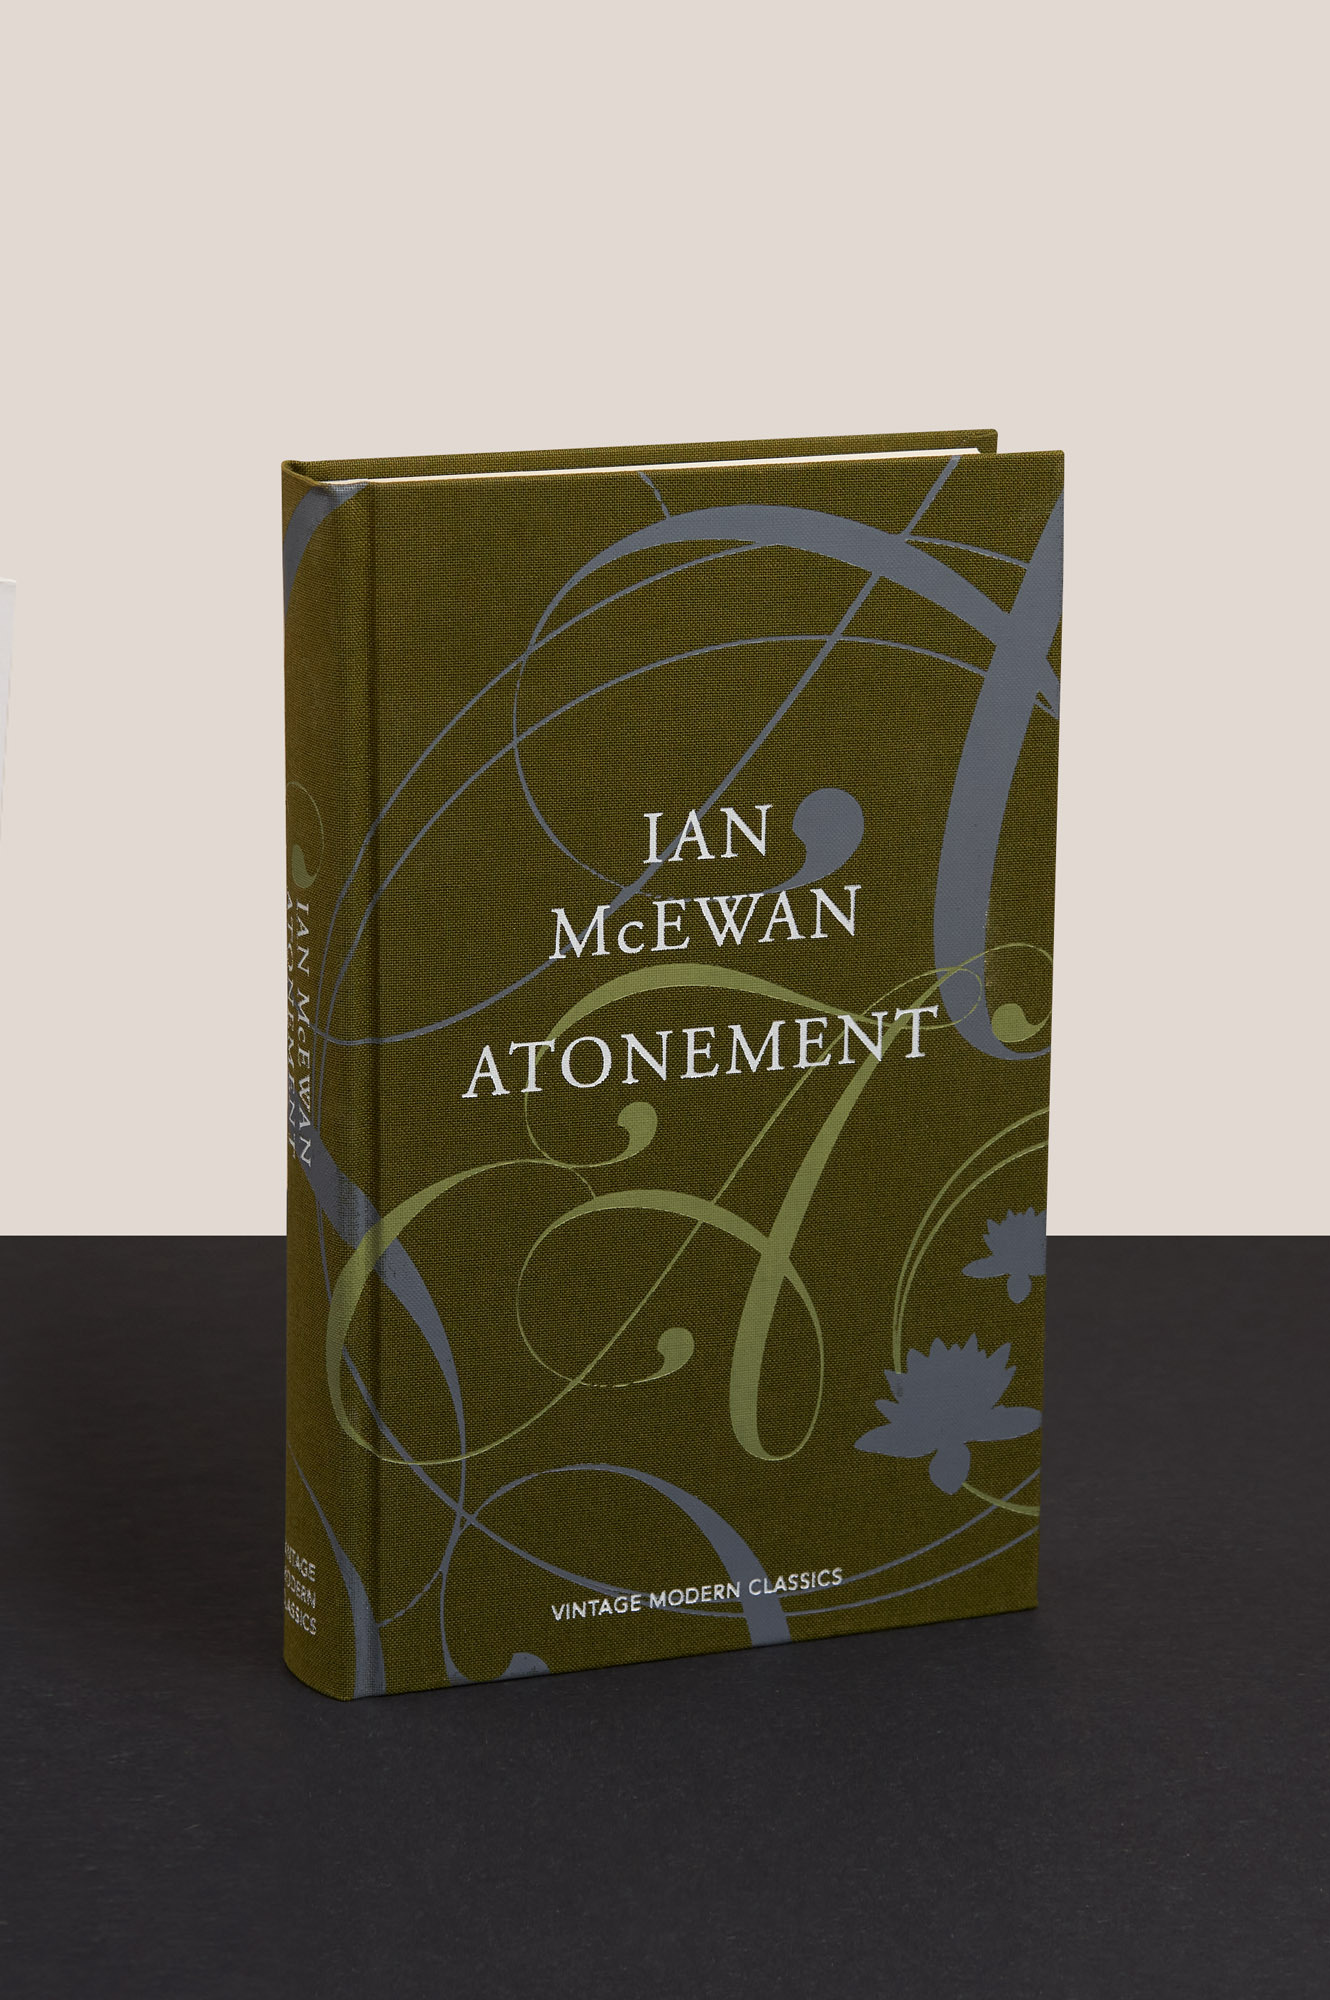 A photograph of a cloth-bound hardback cover of Atonement